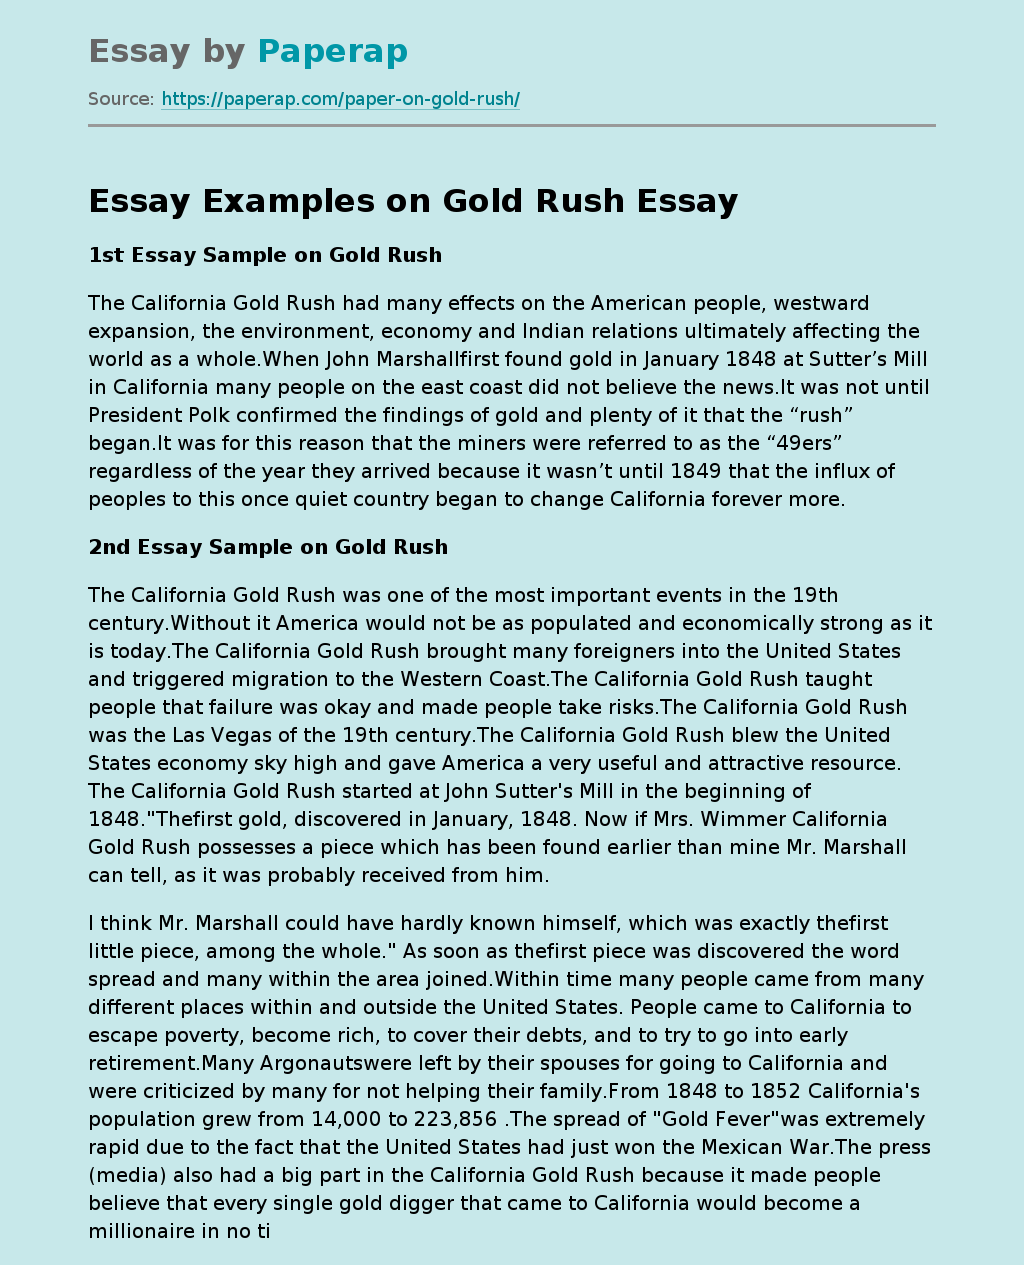 The Impact of California Gold Rush on American History